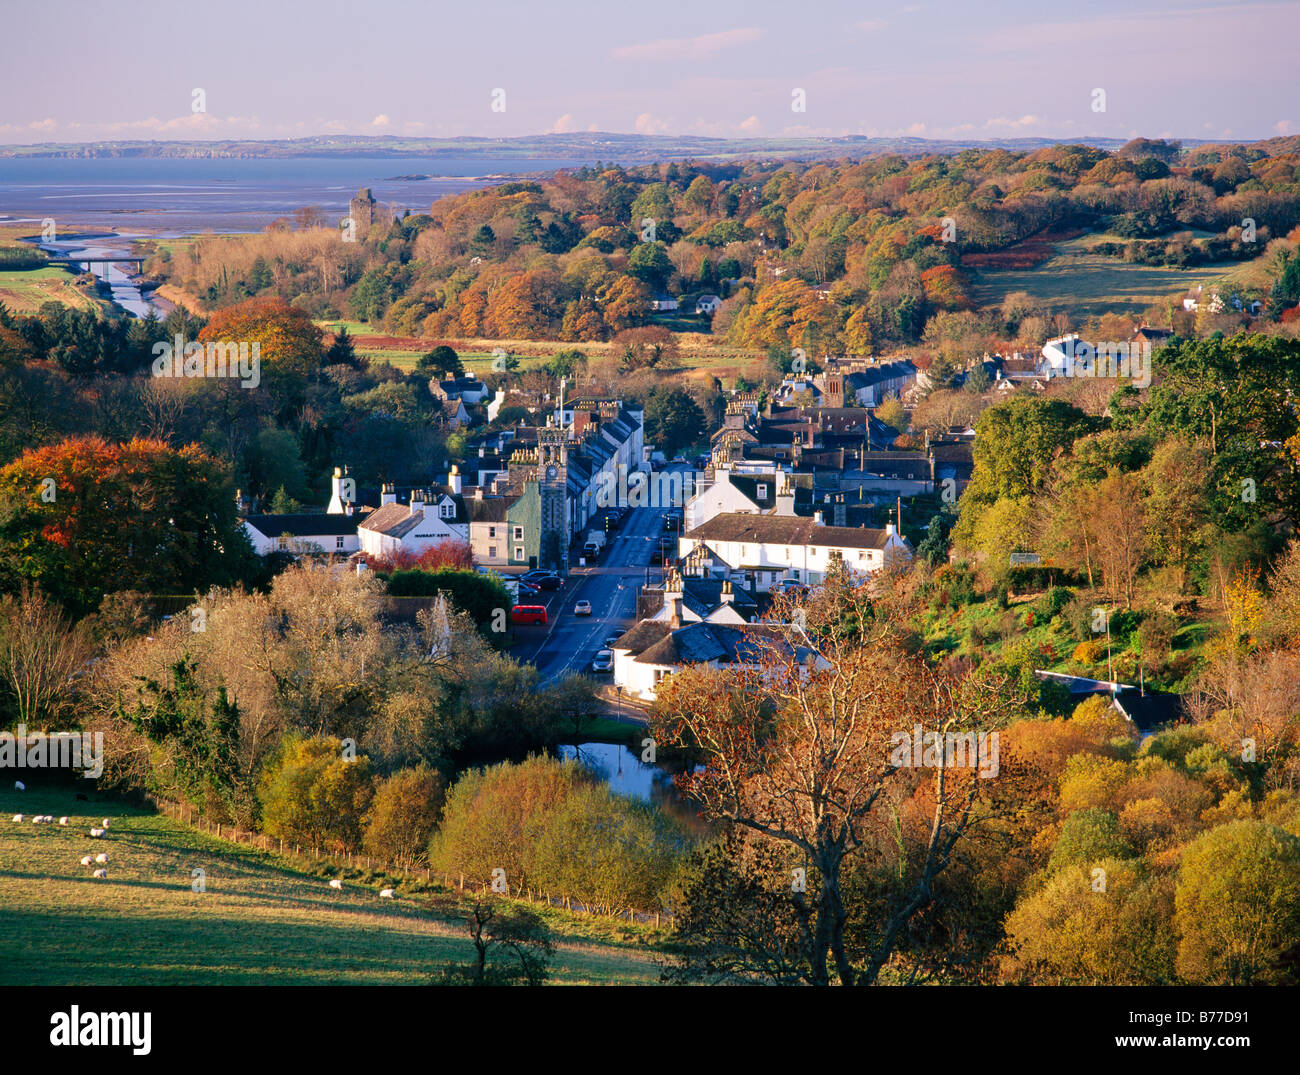 Scenic autumn landscape looking down on town of Gatehouse of Fleet amoungest the trees Galloway Scotland UK Stock Photo